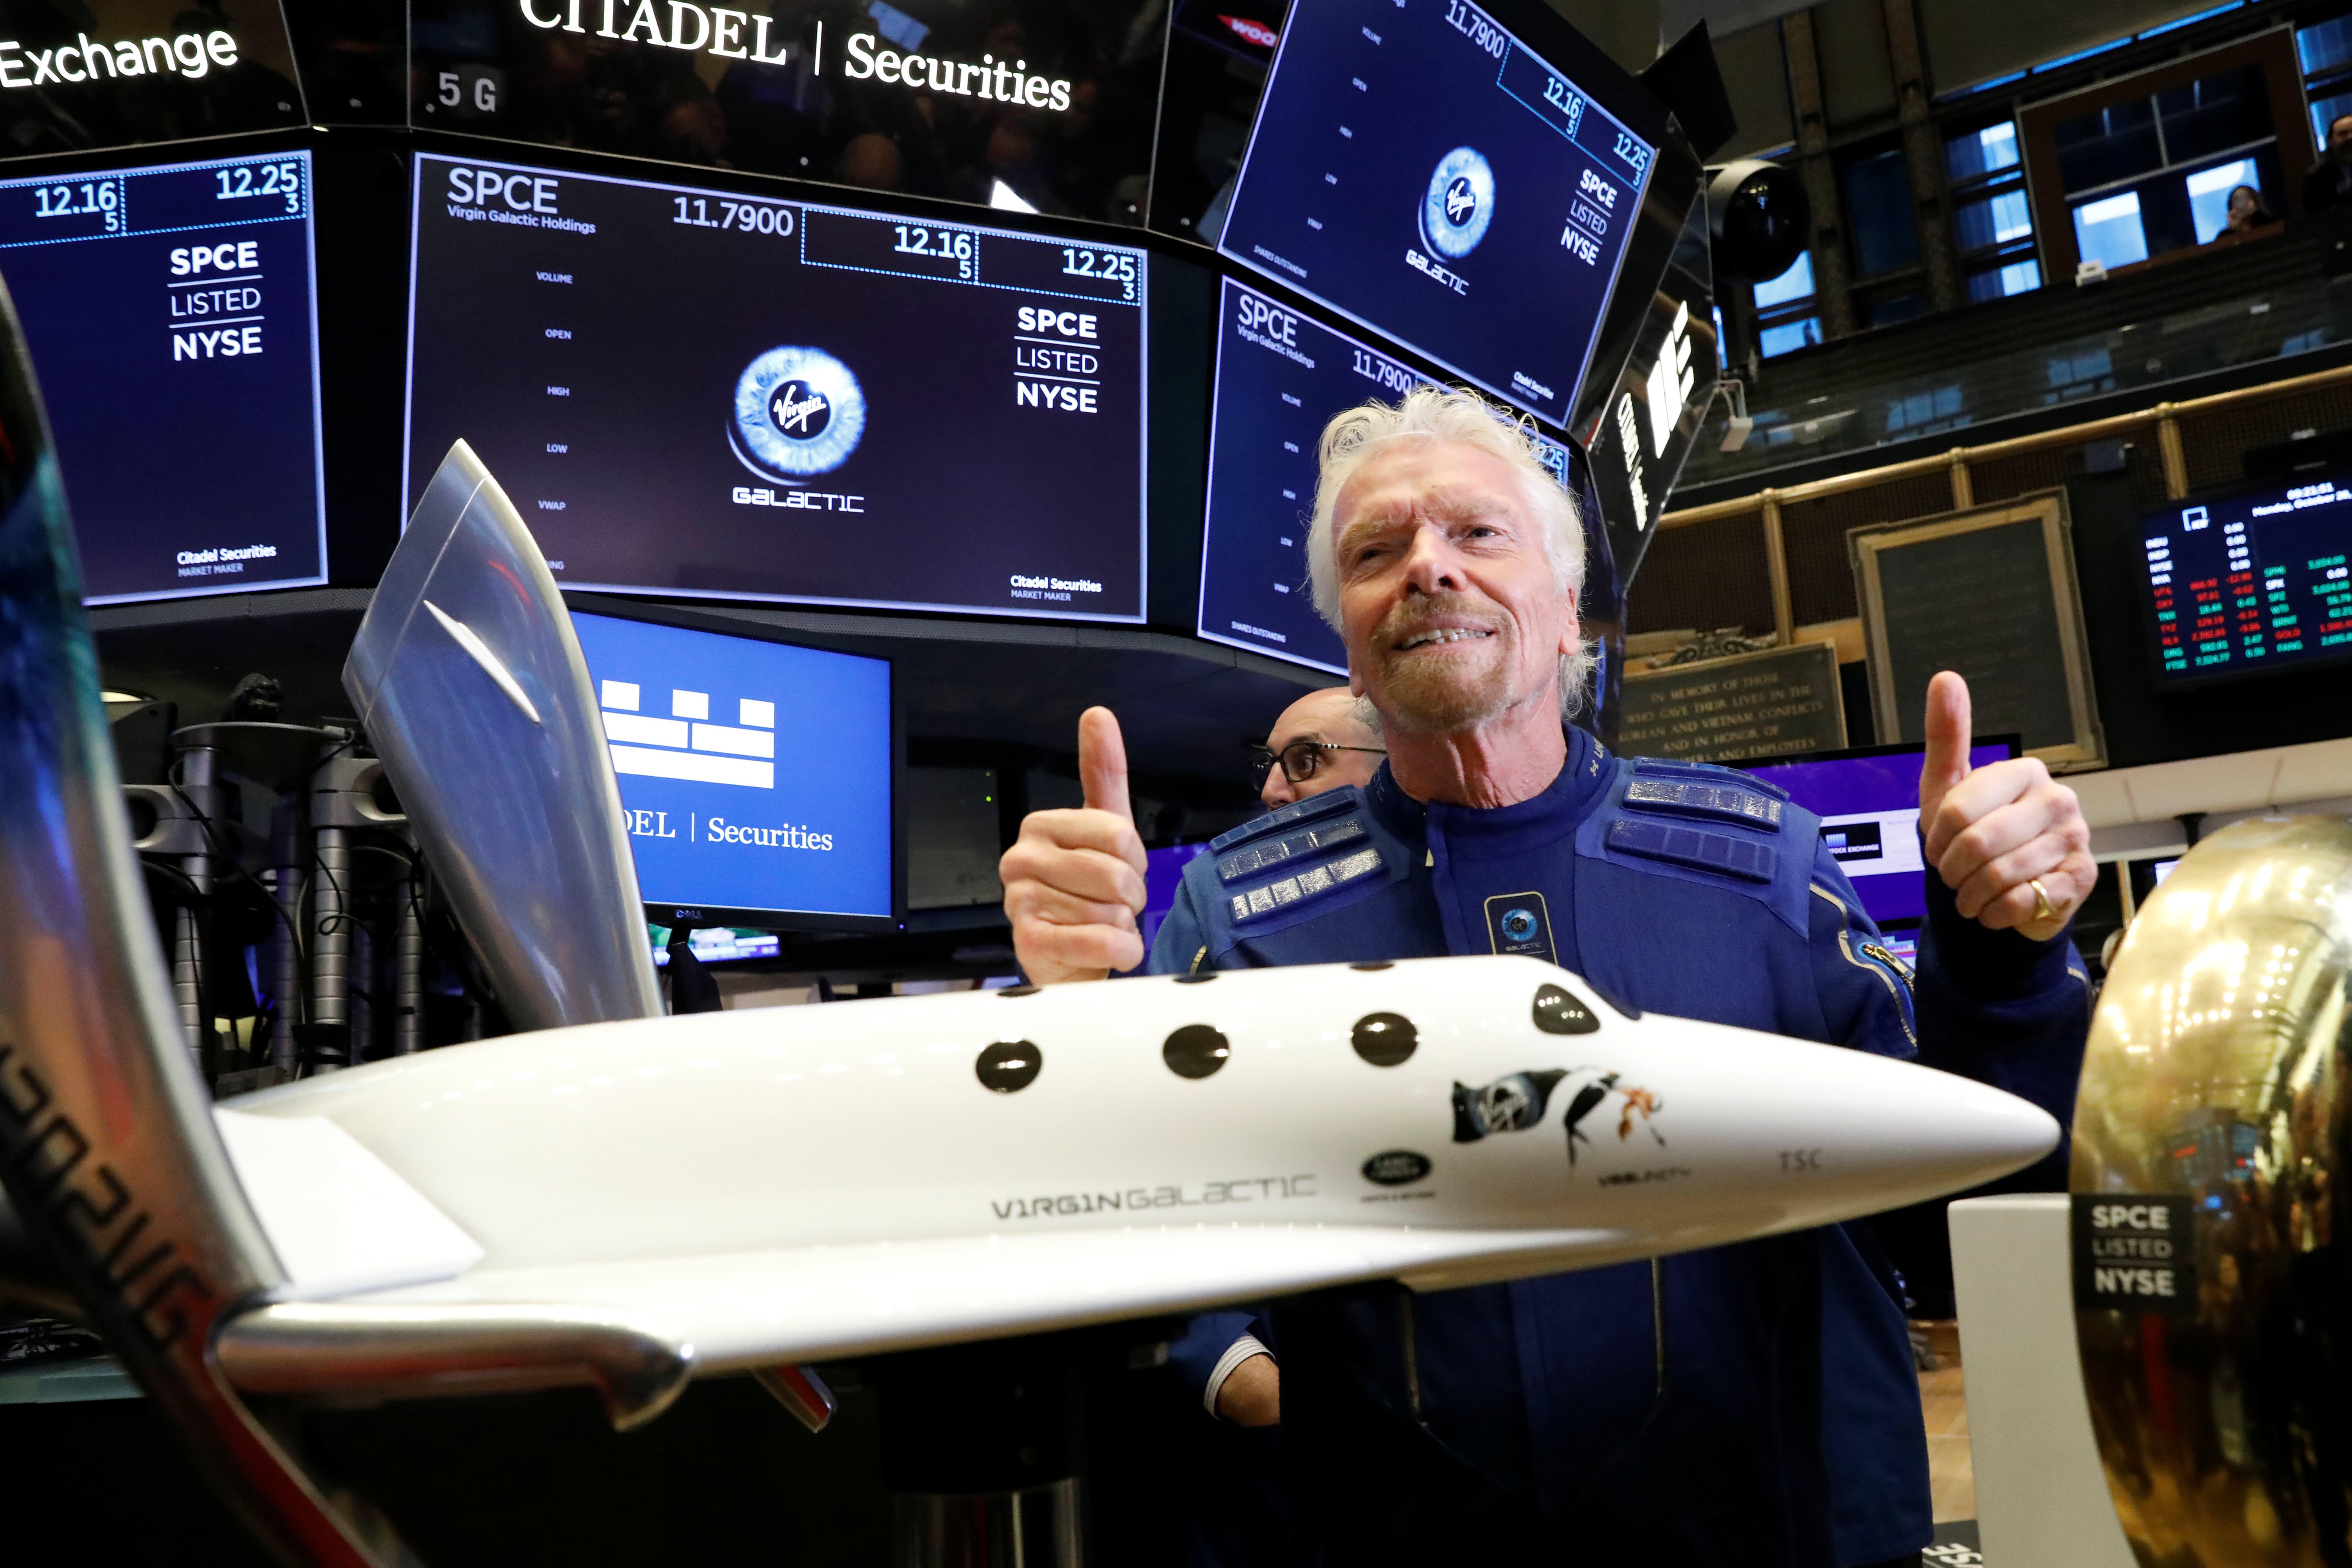 Virgin Galactic took a step closer to completing development of its space tourism system on Saturday, successfully flying its first spaceflight in mor